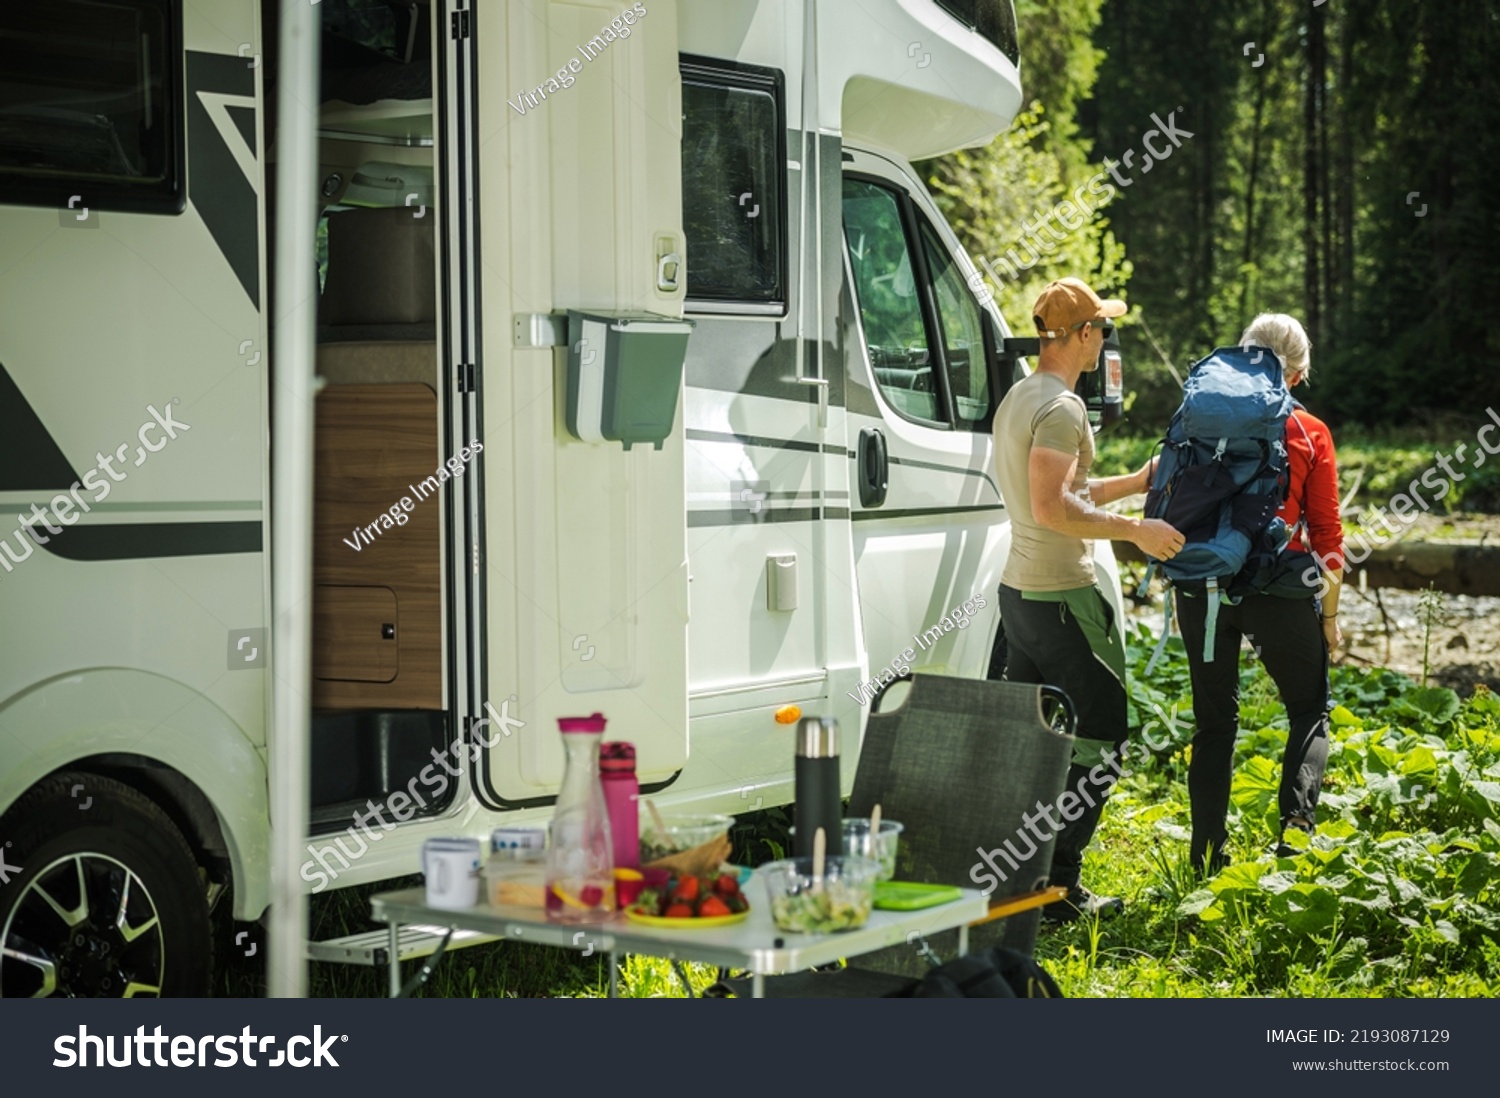 Caucasian Camping Couple Next to Their Class C Motor Home. Preparing For a Hike. Recreational Vehicles Theme. #2193087129